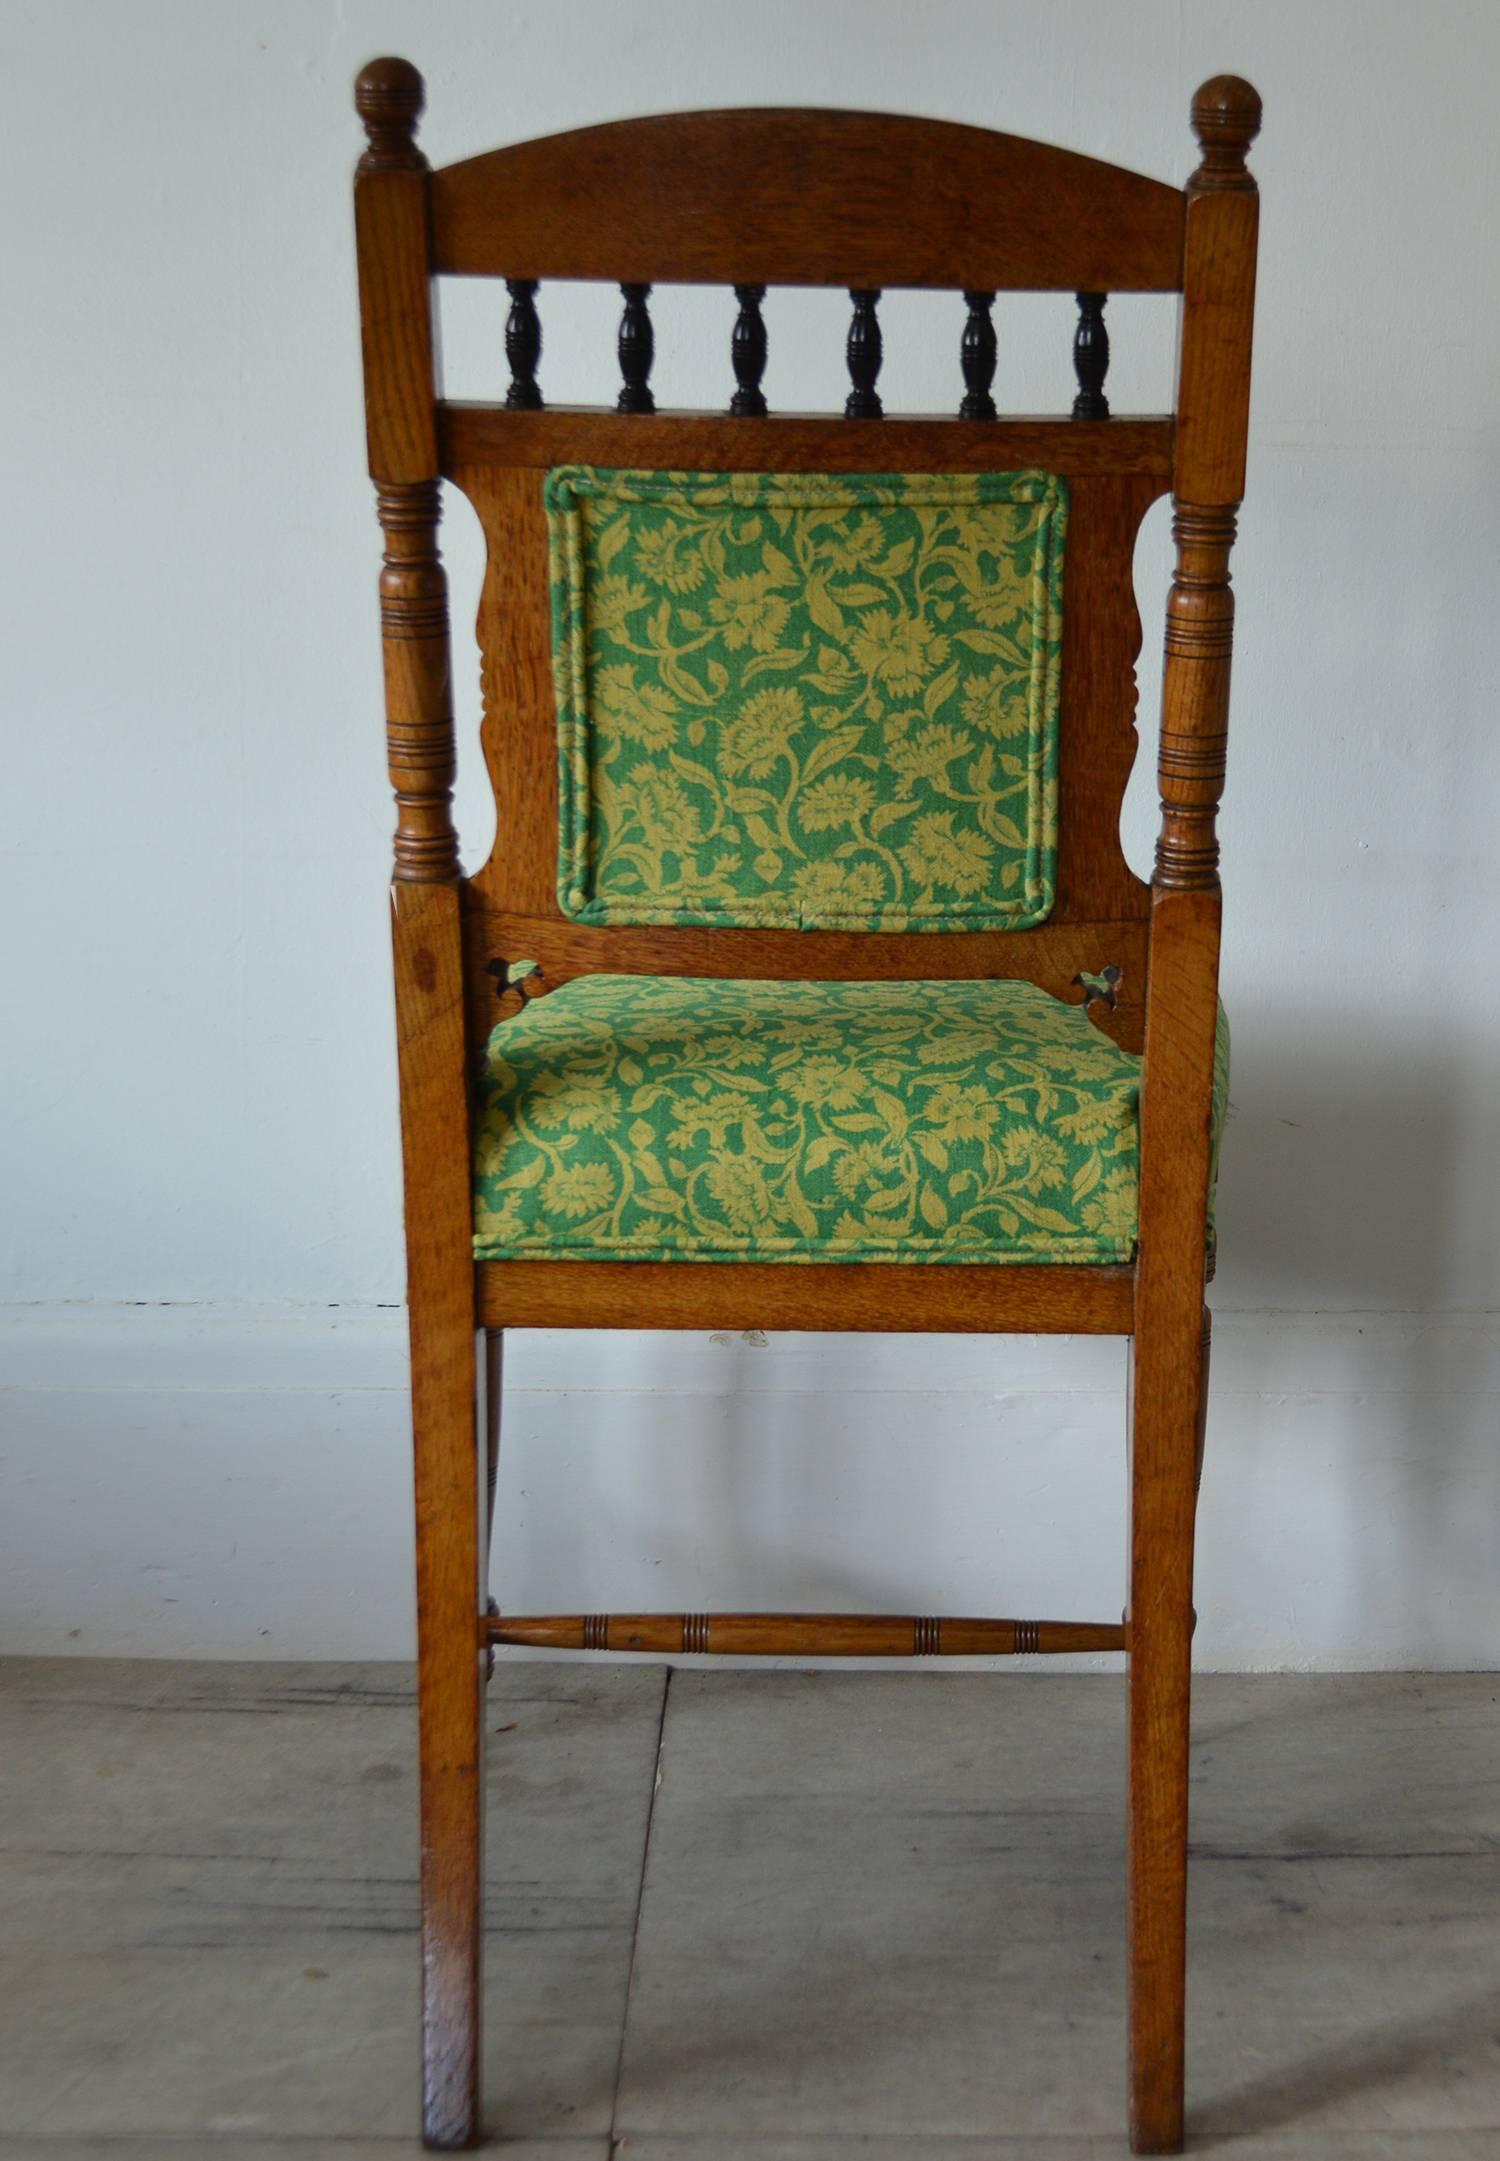 Aesthetic Movement Set of Four Antique Aesthetic Style Chairs, English, circa 1900